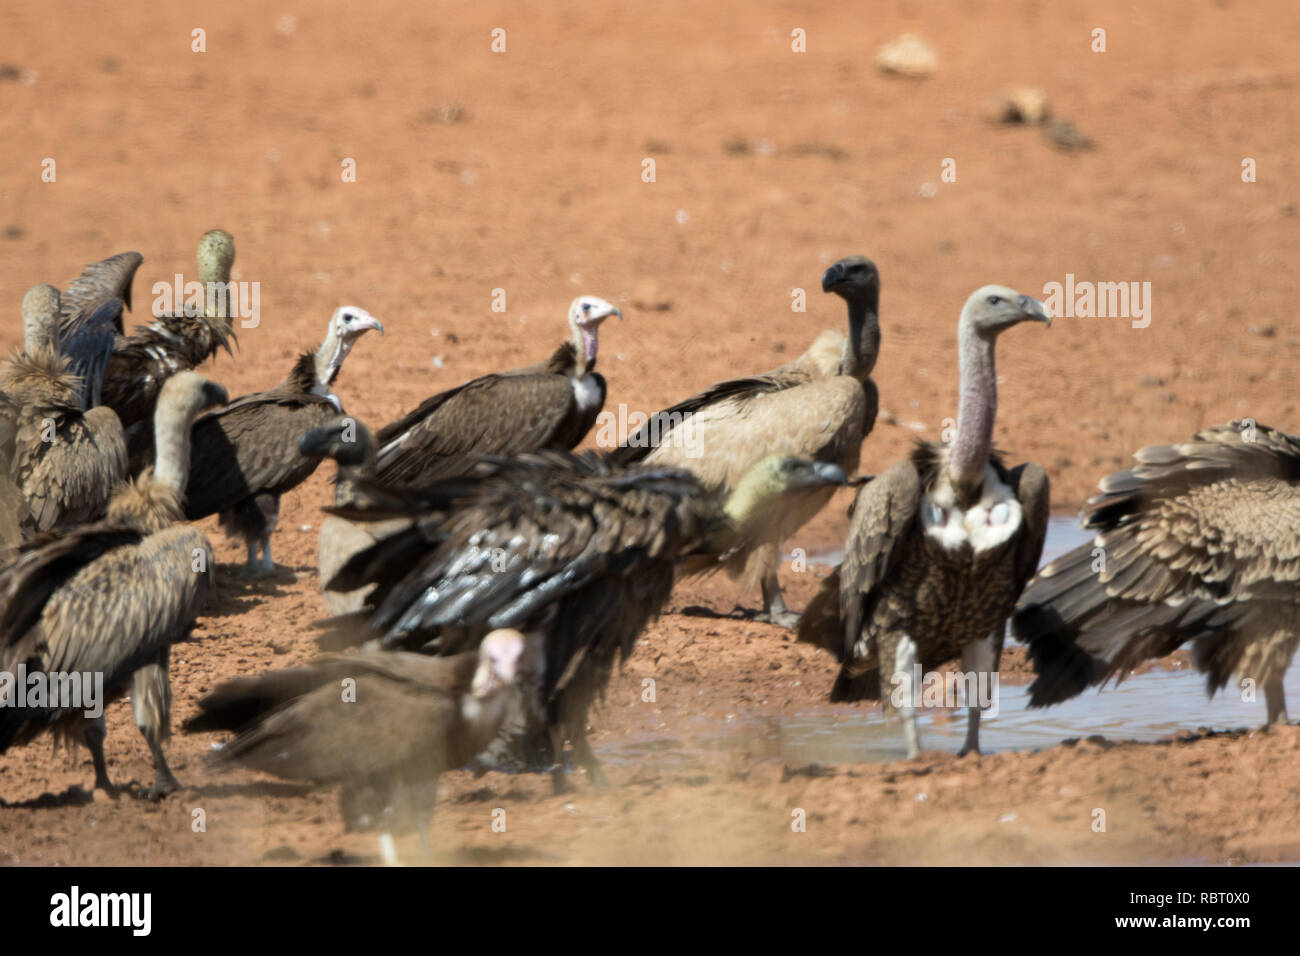 African White-Backed Vulture (Gyps africanus) Stock Photo